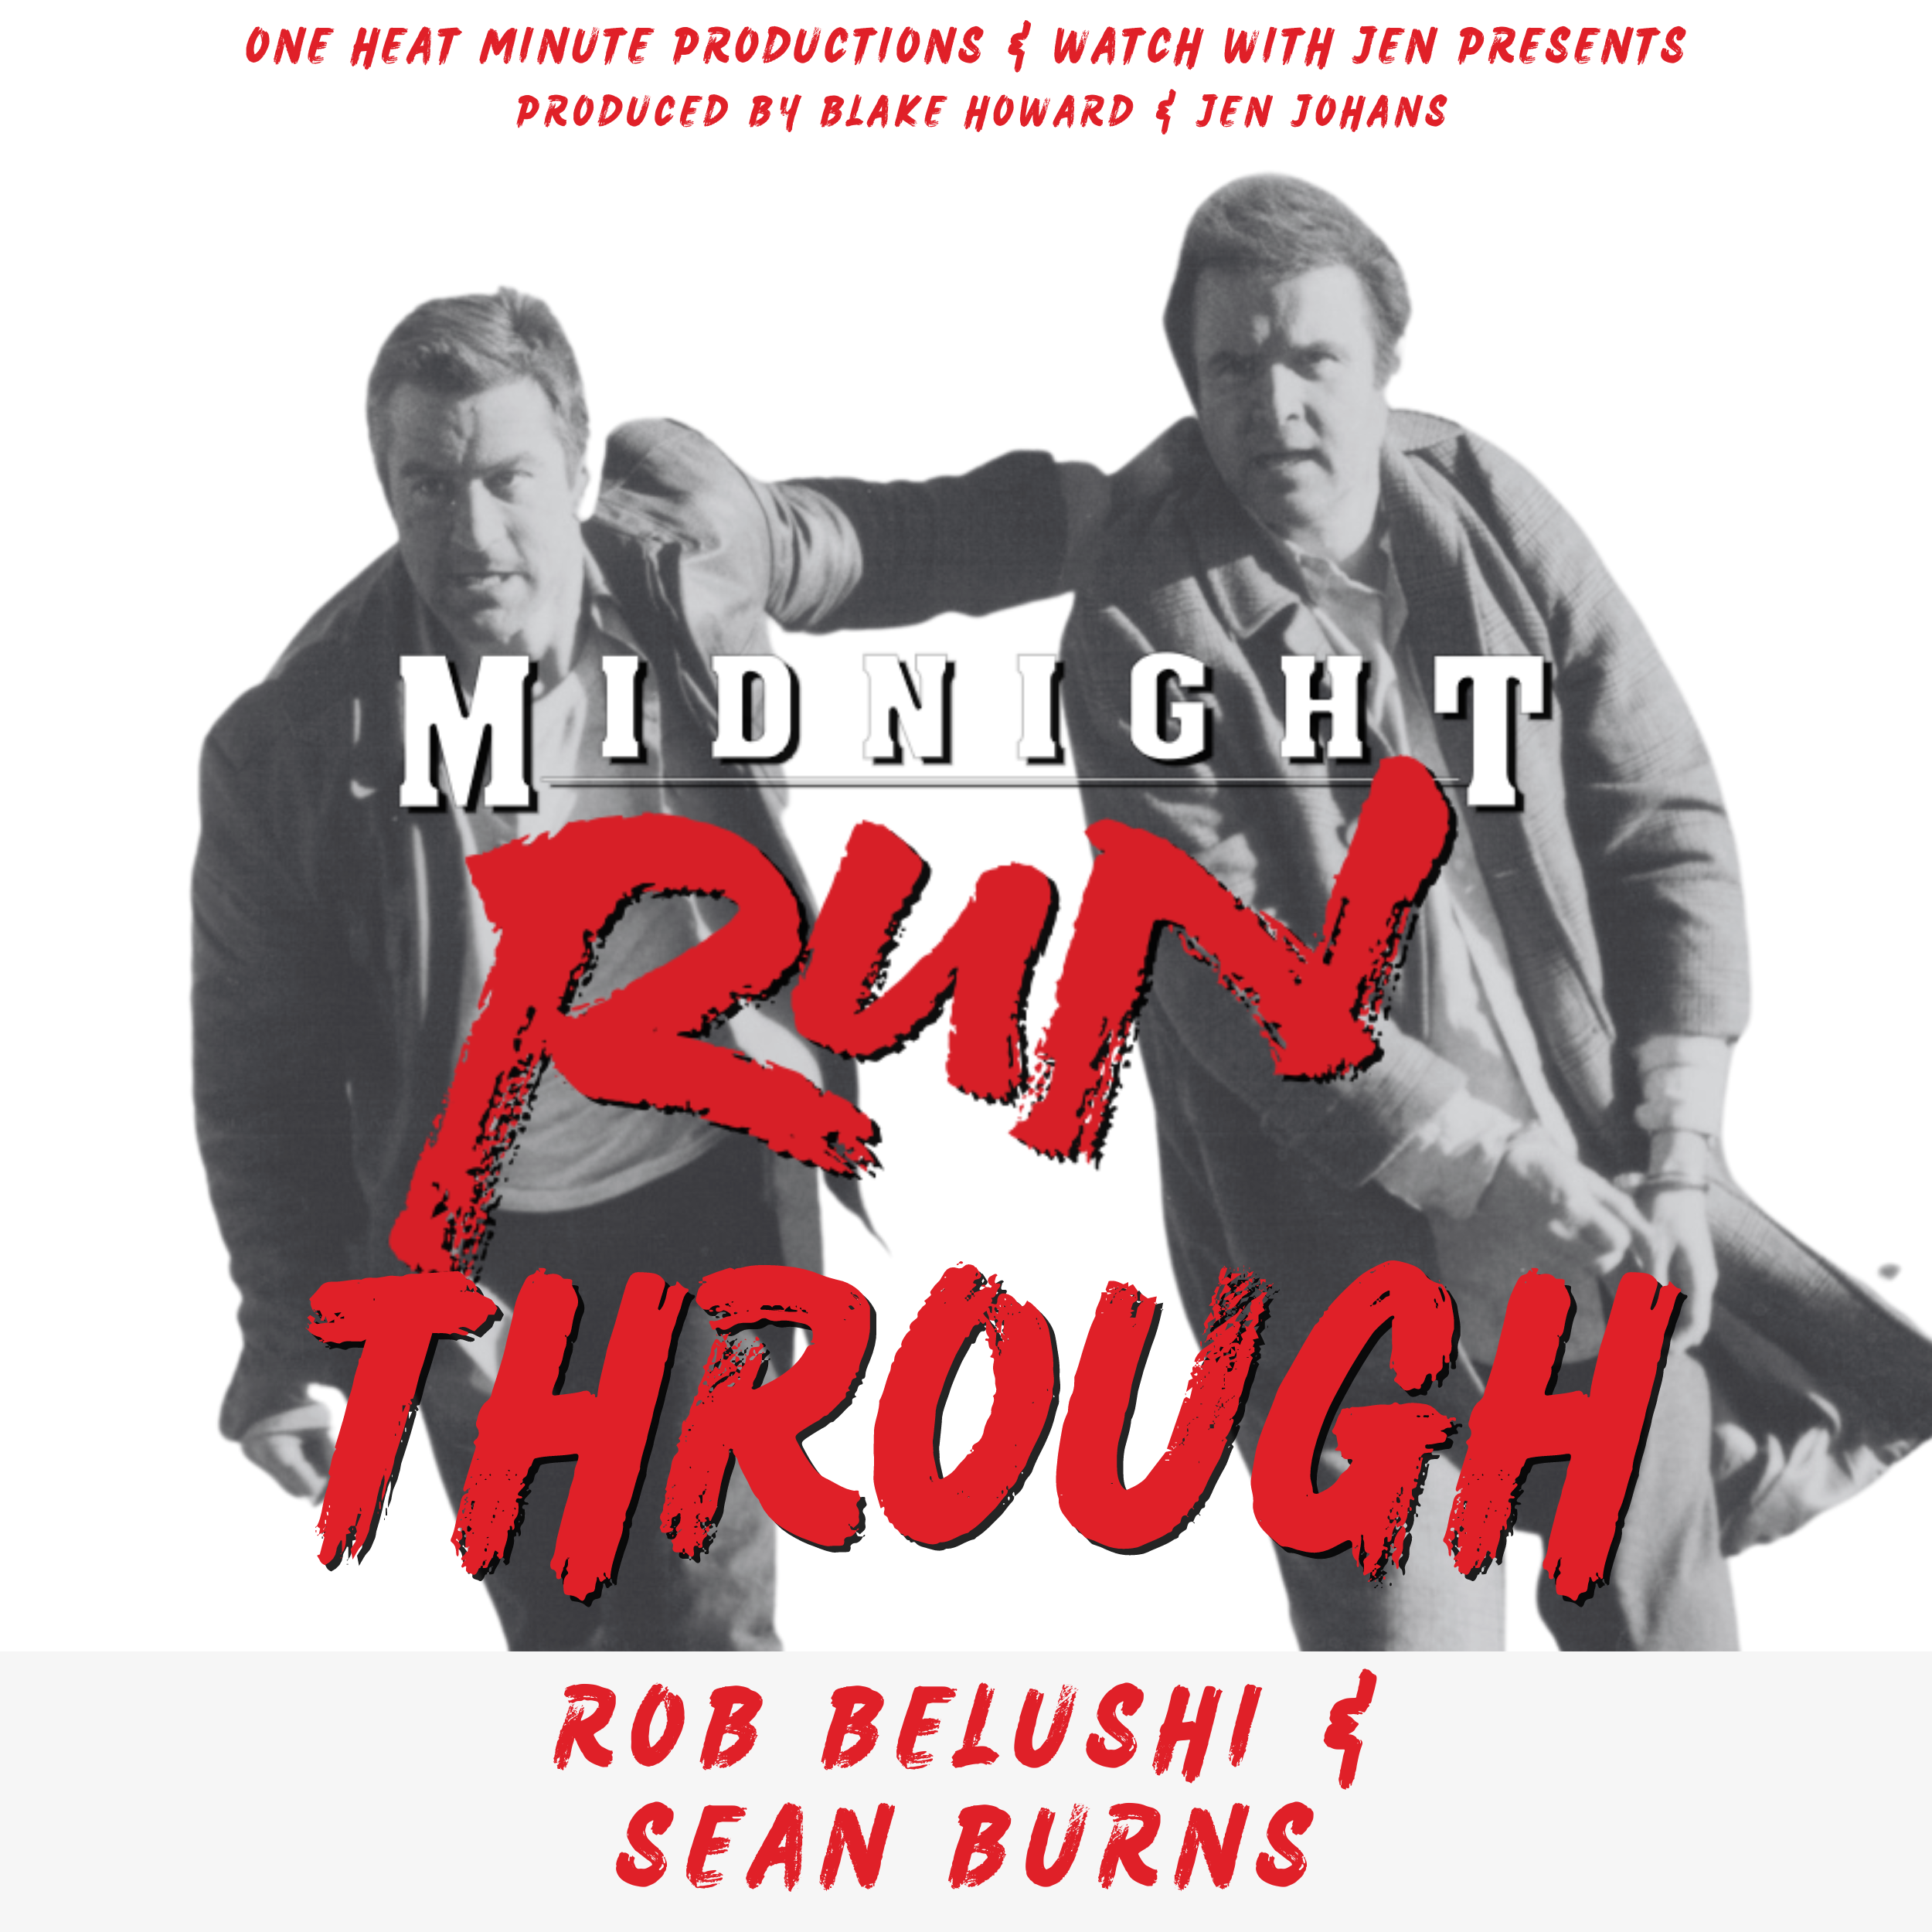 MIDNIGHT RUN-THROUGH - Episode 11 - Rob Belushi & Sean Burns (From One Heat Minute Productions & Watch With Jen)